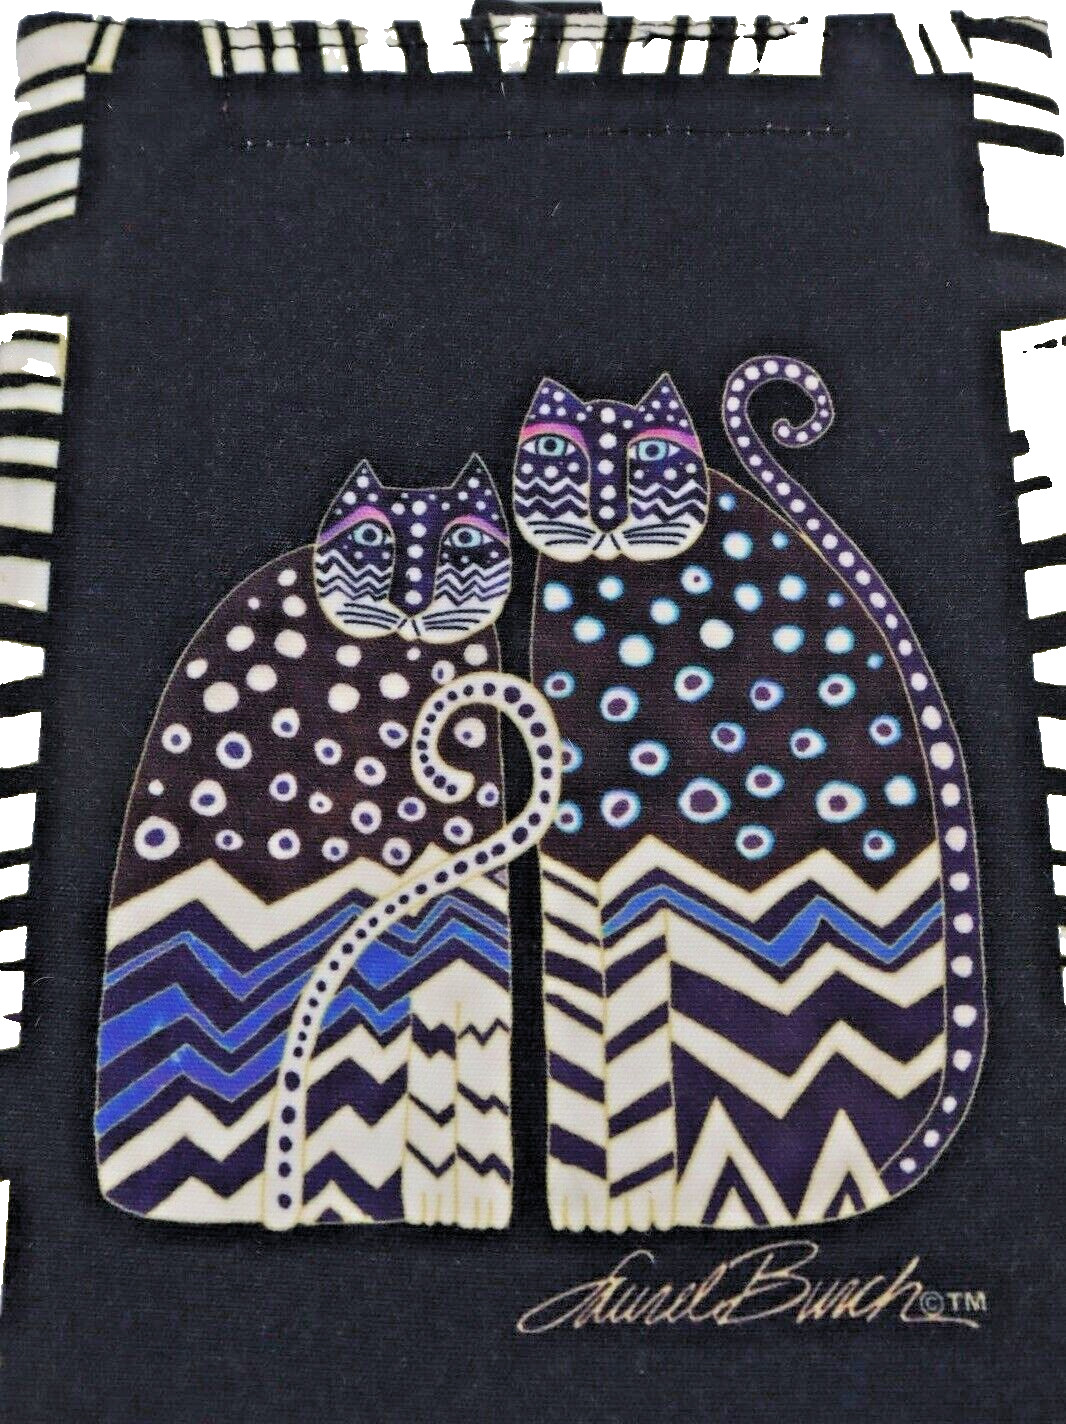 Laurel Burch iPad Kindle eReader Padded Canvas Cover Pouch Spotted Cat Twins 